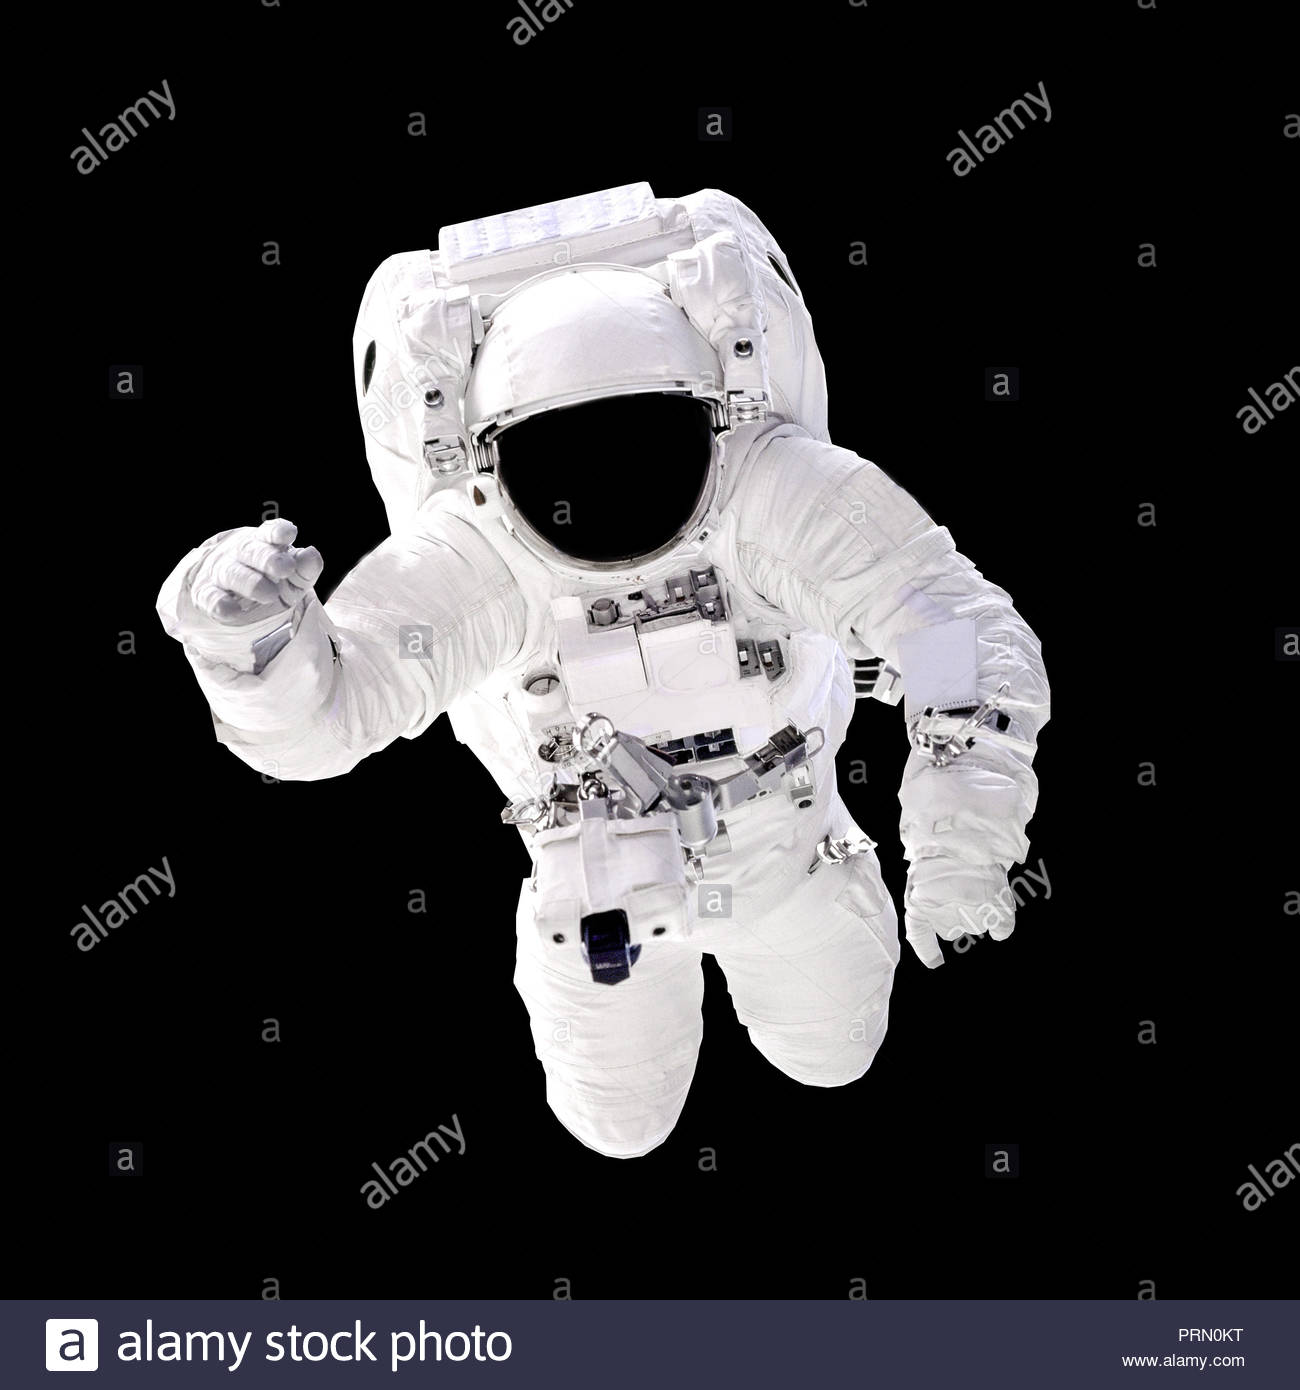 Astronaut in spacesuit close up isolated on black background